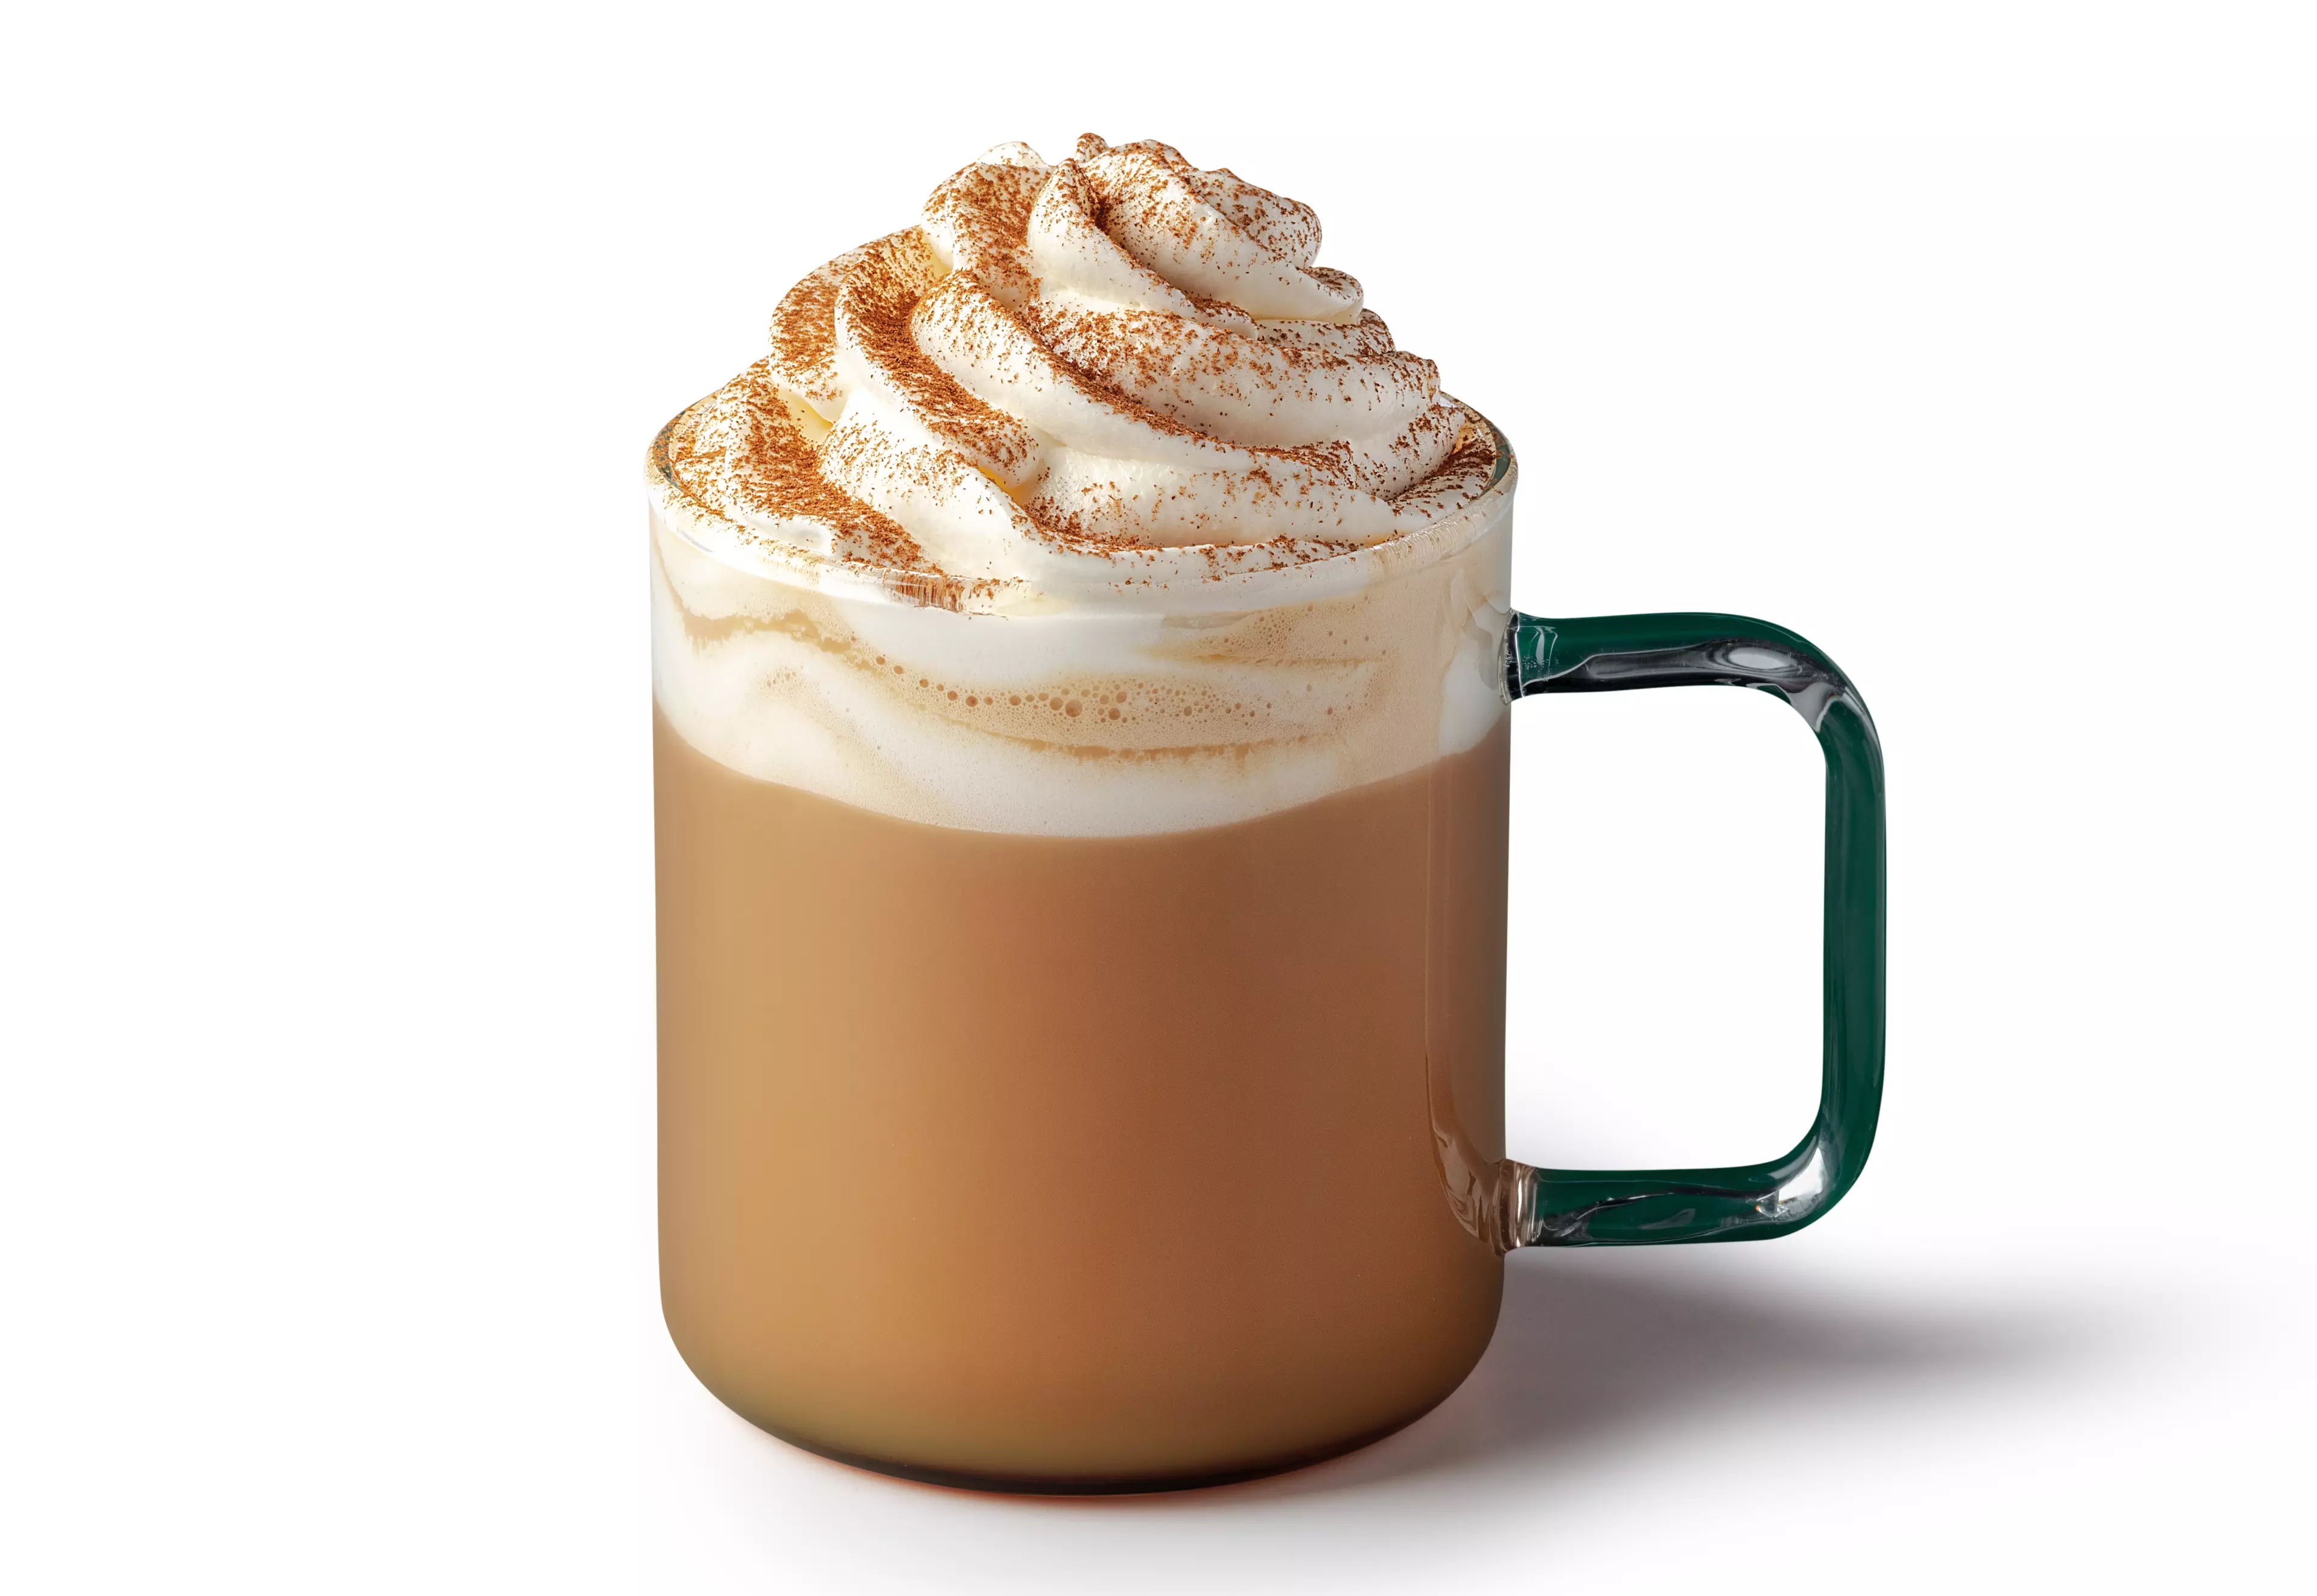 Starbucks has launched vegan whipped cream for its pumpkin spice lattes (